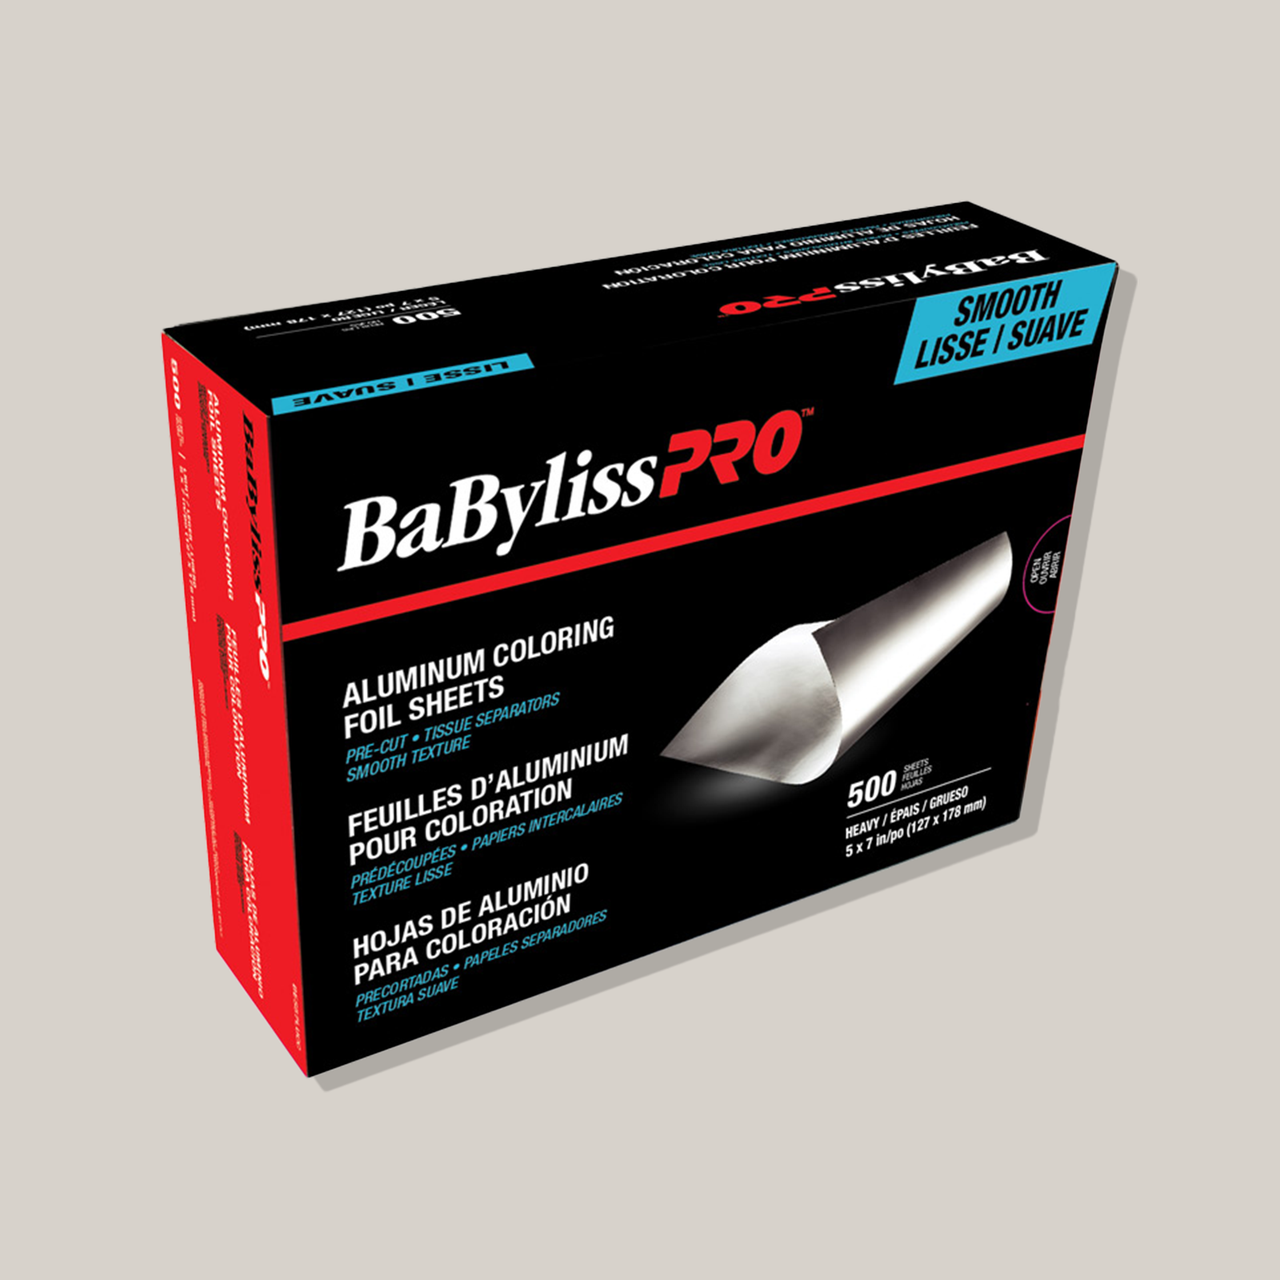 Babylisspro (500/bx) Foil Sheets Heavy and Silver #557HSLC 